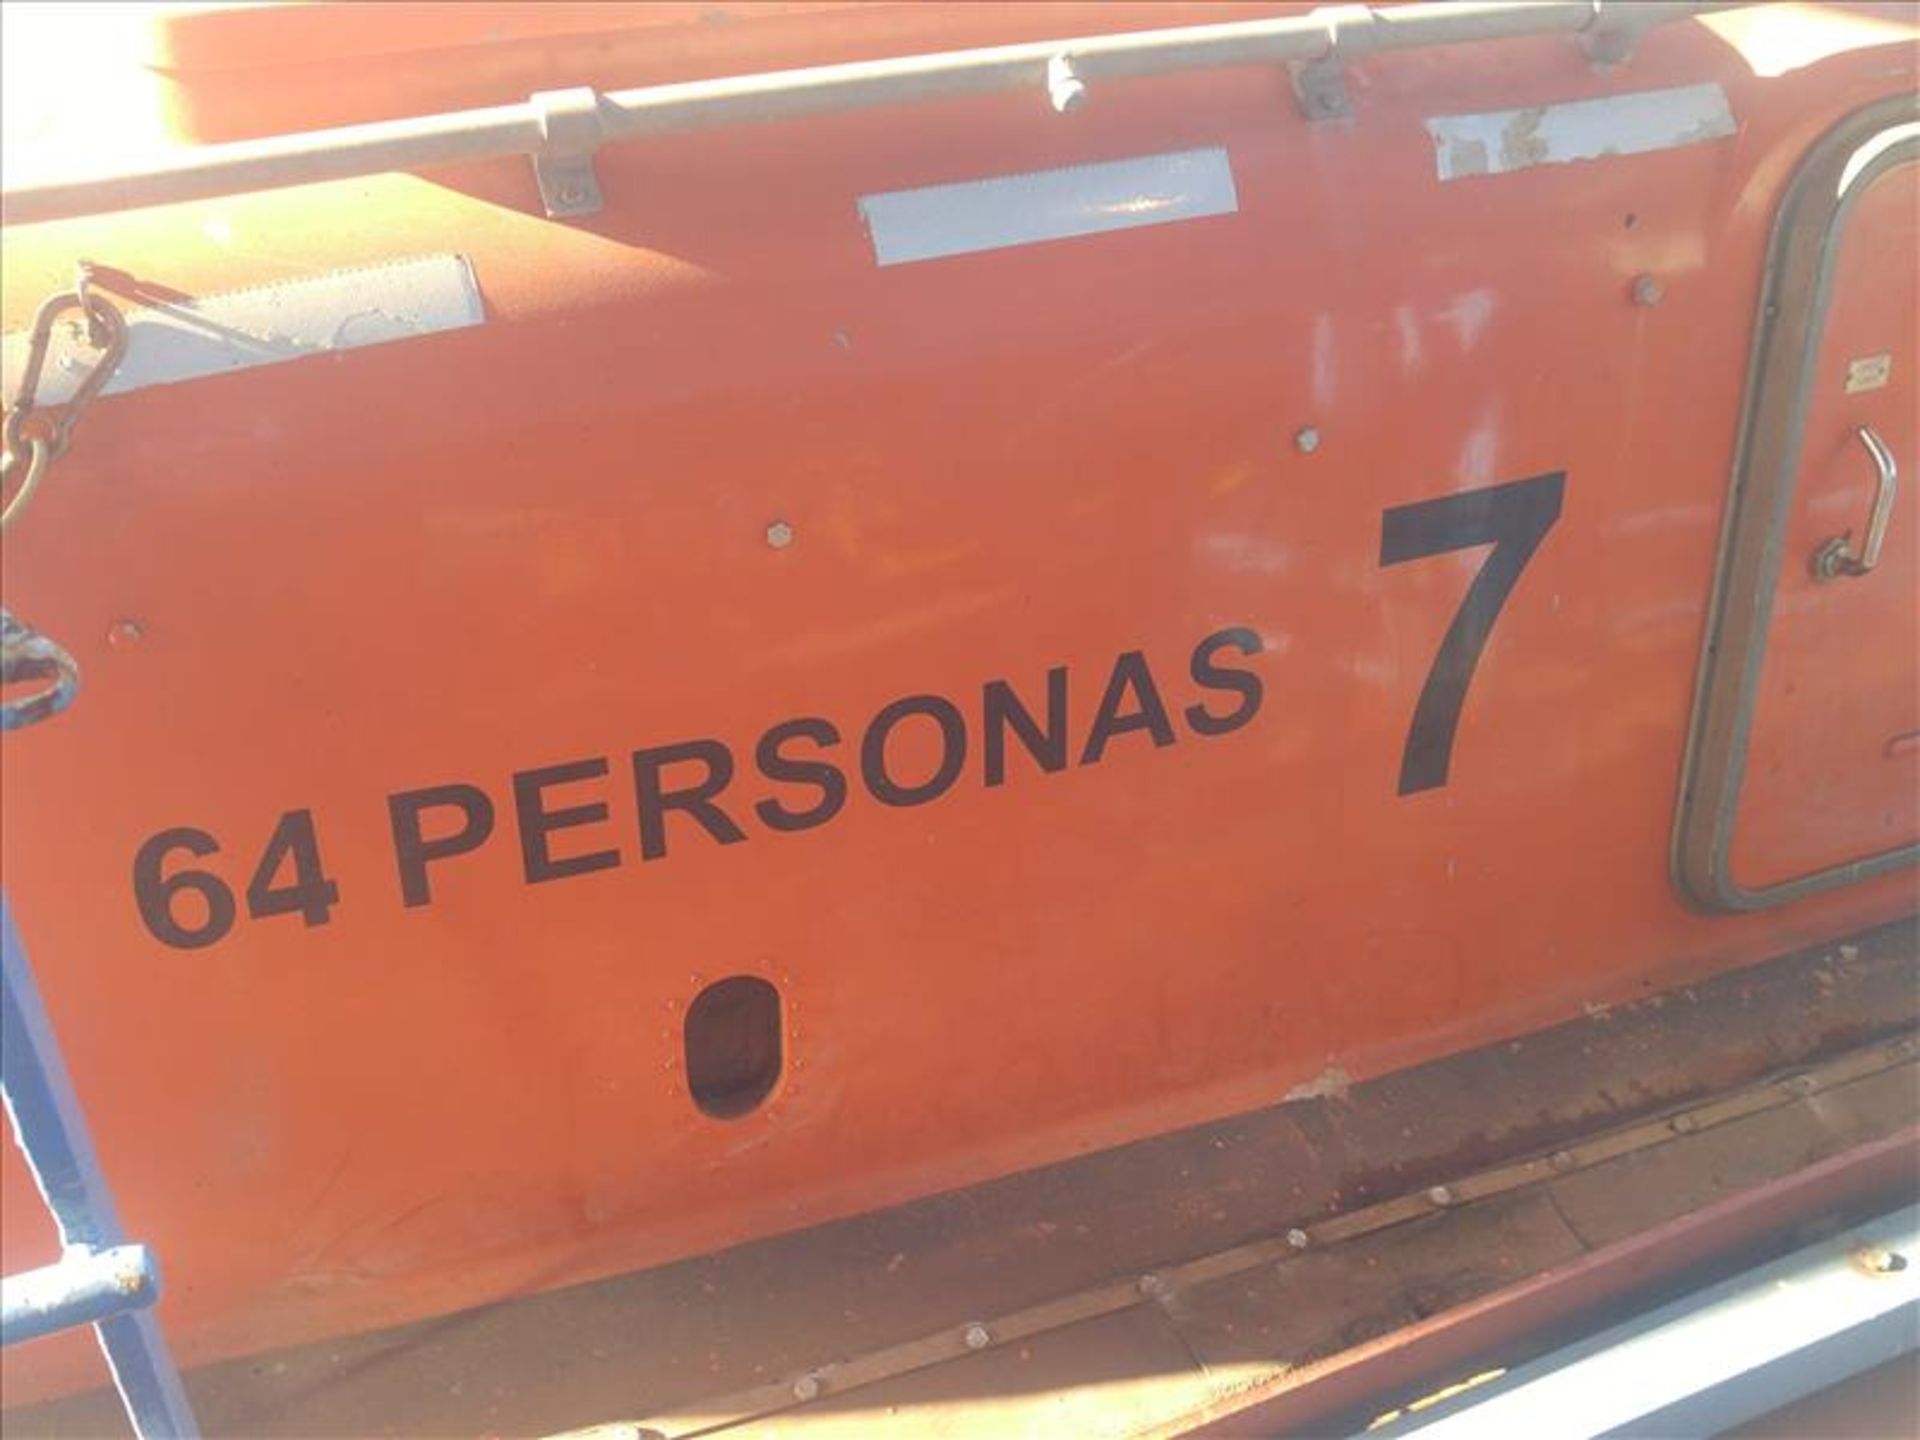 Harding 64 Person Lifeboat, No. of Pers.: 64, Material: G.R.P, L: 9.8, B: 3.3, D: 1.38, CUB: 33. - Image 7 of 17